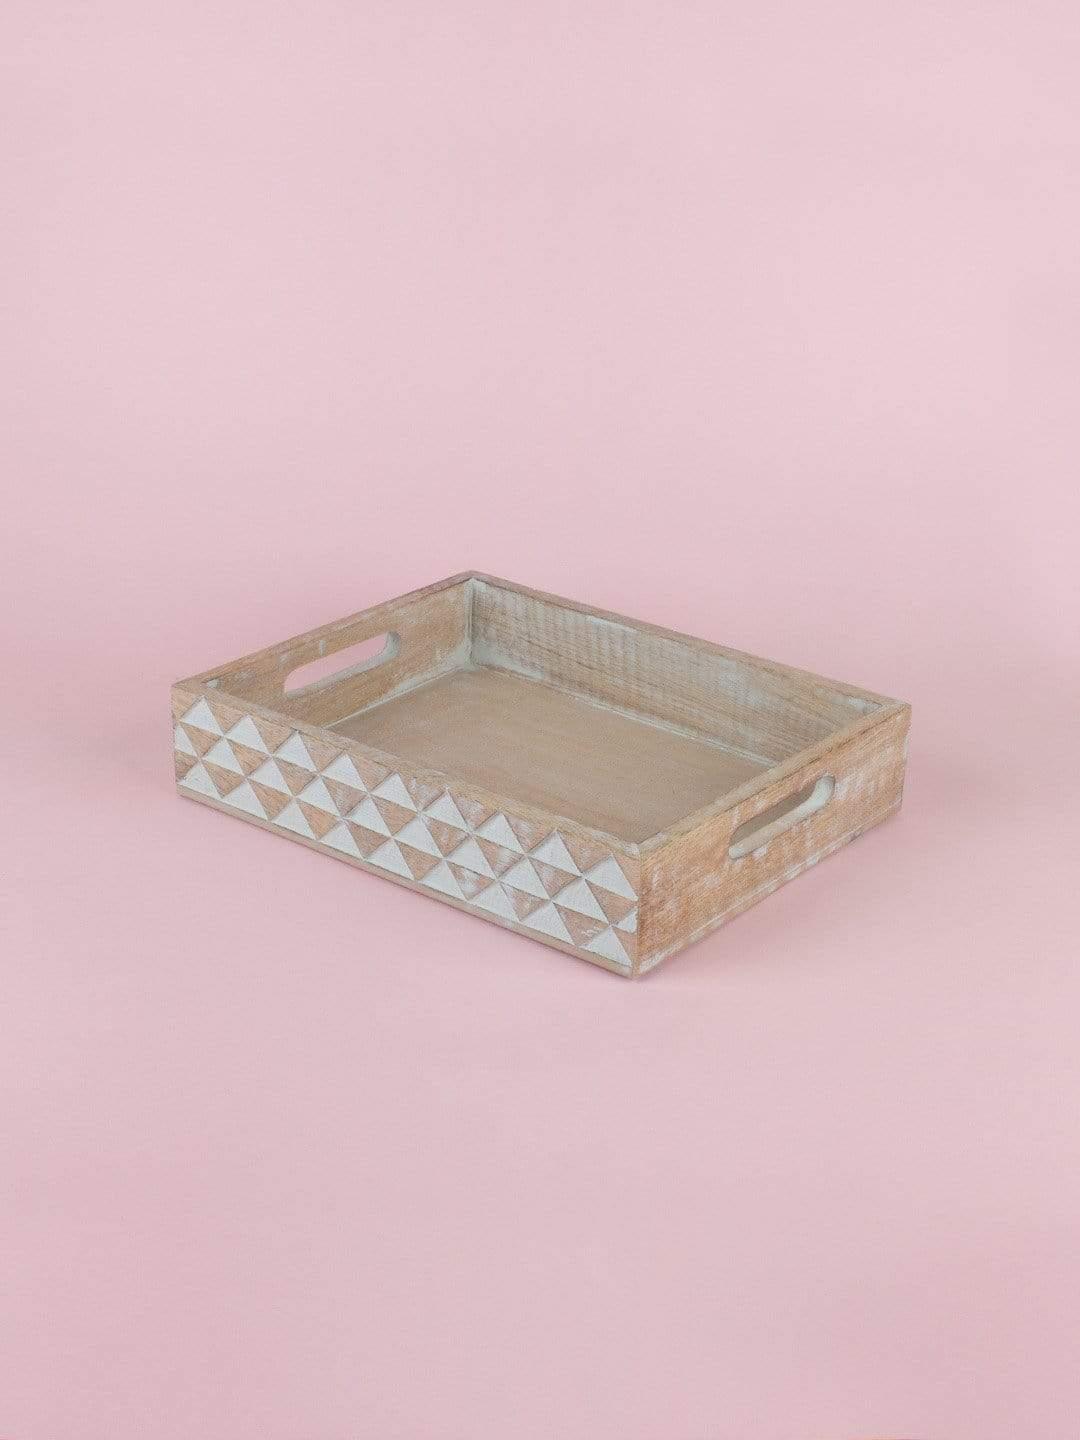 Pyramid Wooden Trays - Set Of 2Material: MANGO WOOD &amp; MDF
Dimensions: Large - 14L x 10W x 2H Inch ; Small - 10.25L x 8.25W x 2H Inch

Don't wash, Use a slightly damp cloth to clean. Wipe dry. Pyramid Wooden Trays - SetThe Wishing Chair